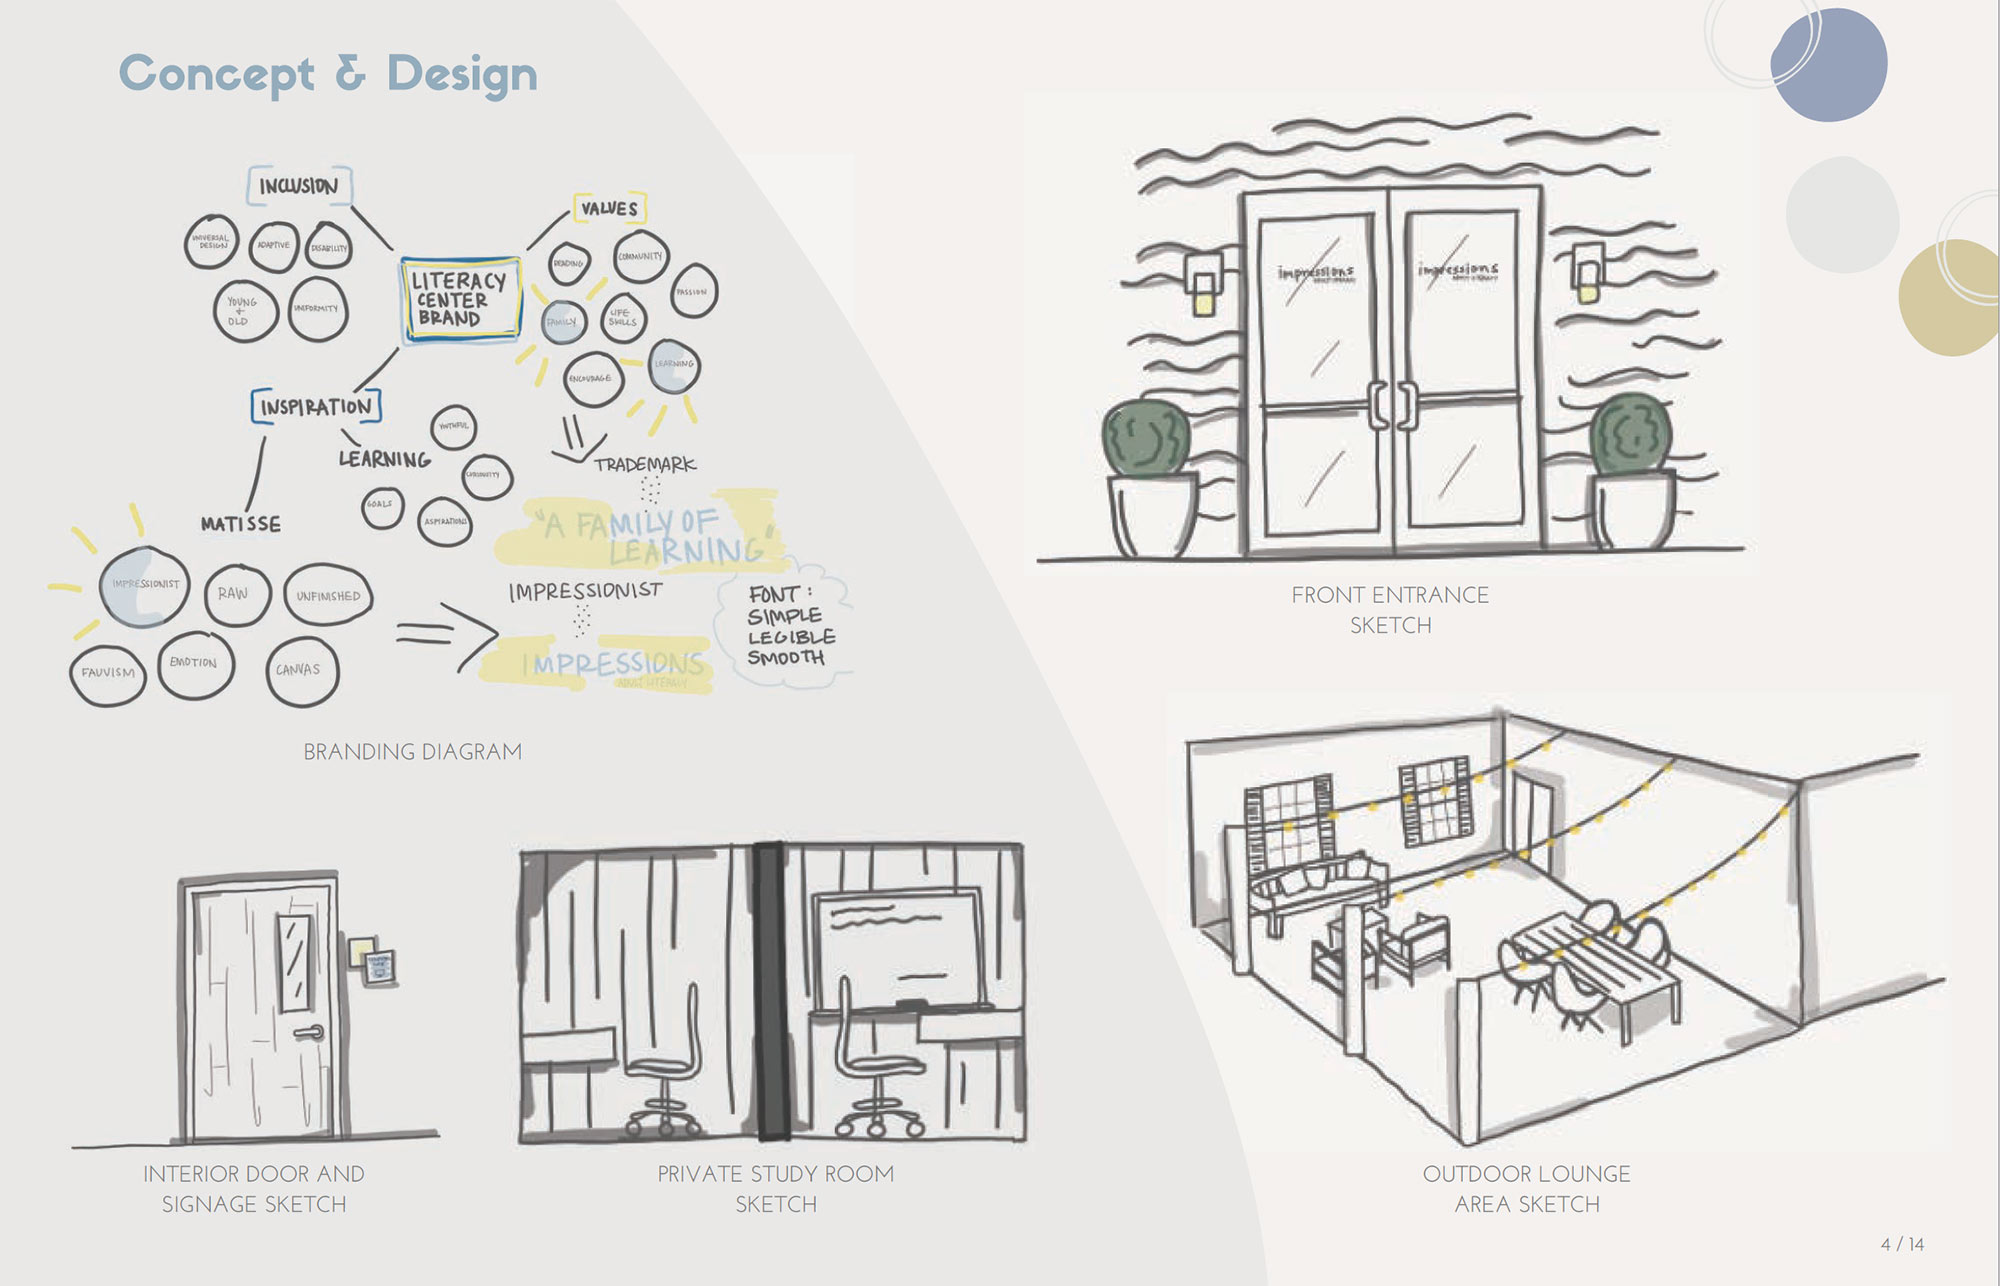 concept and design drawings of front entrance, indoor door and signage, private study room, and outdoor lounge area